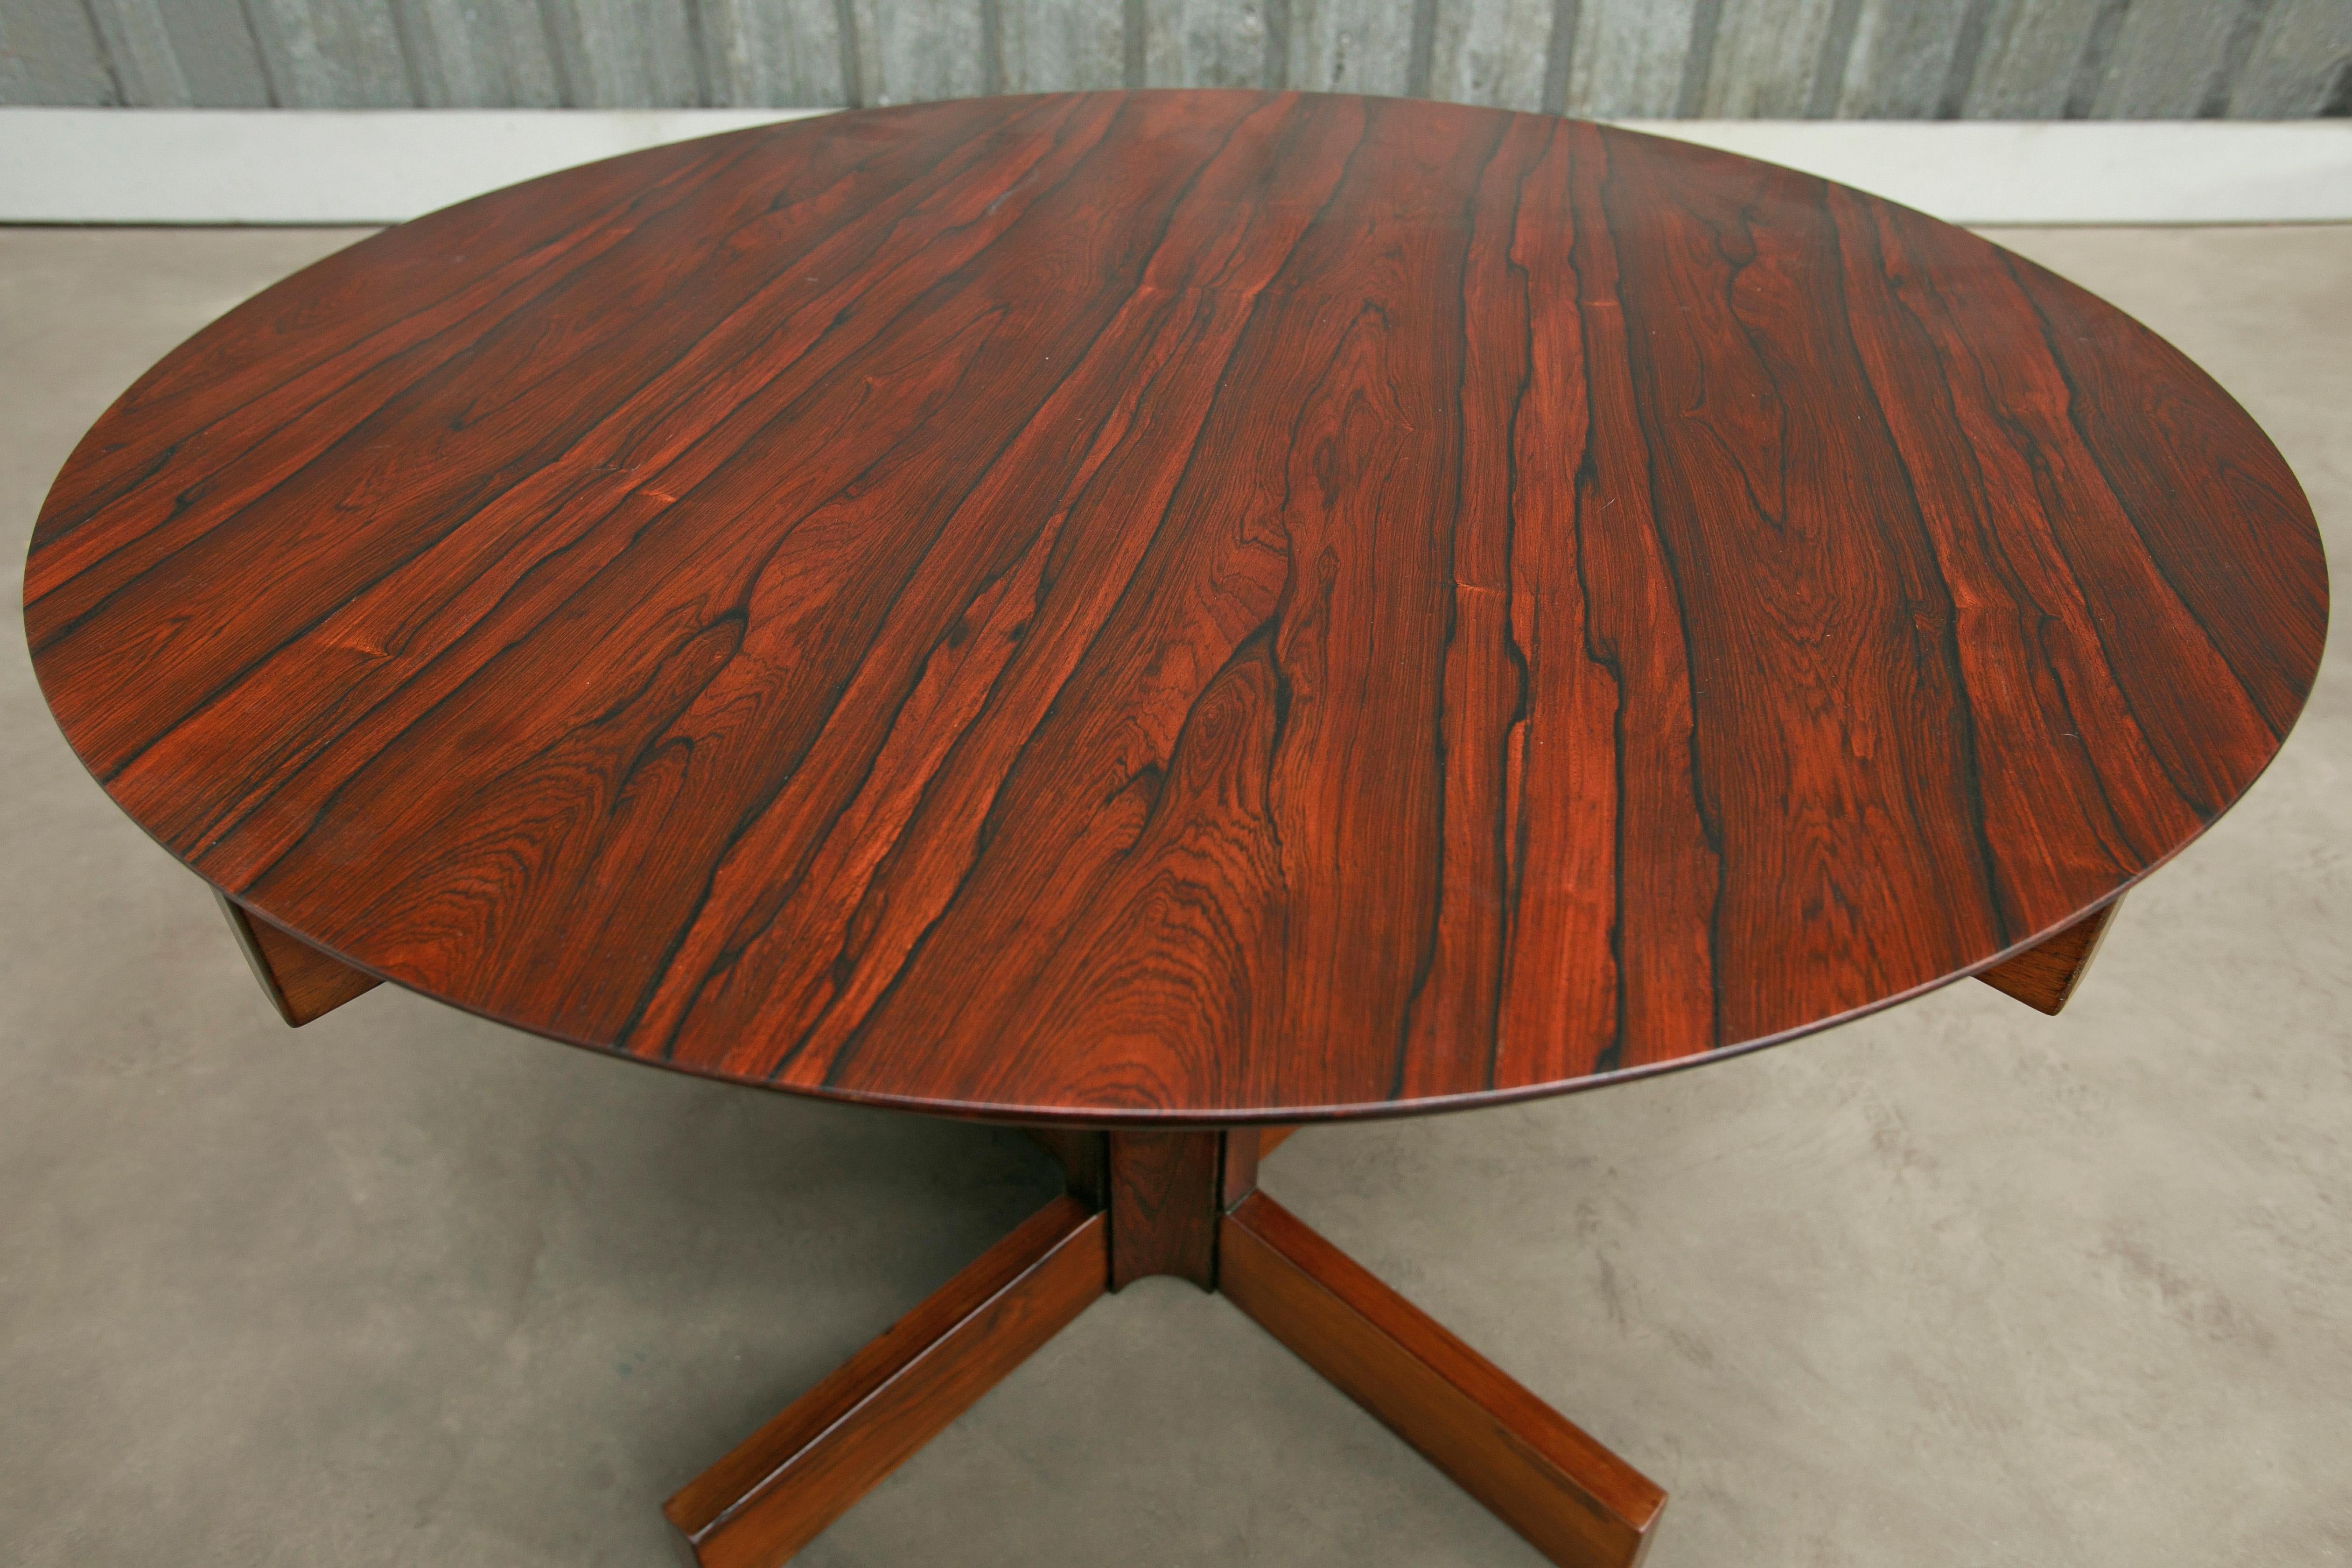 Brazilian Mid-Century Modern Dining Table in Hardwood by Sergio Rodrigues, 1960, Brazil For Sale